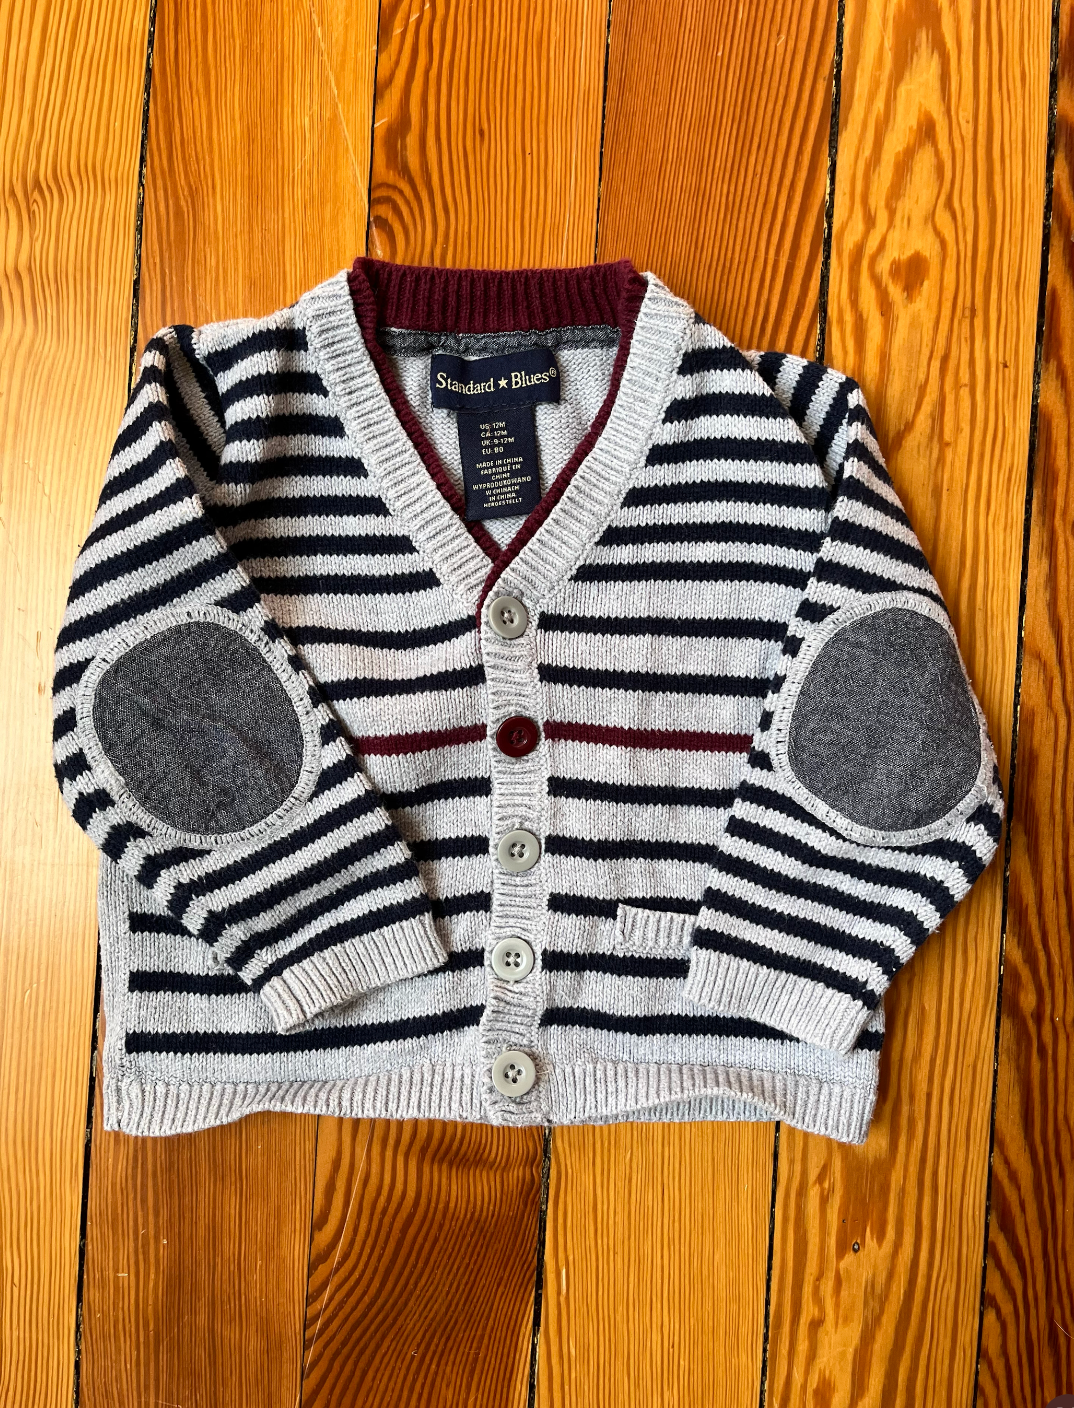 Standard Blues Striped Cardigan with Elbow Patches - 12M - Gray, Navy and Maroon - EUC